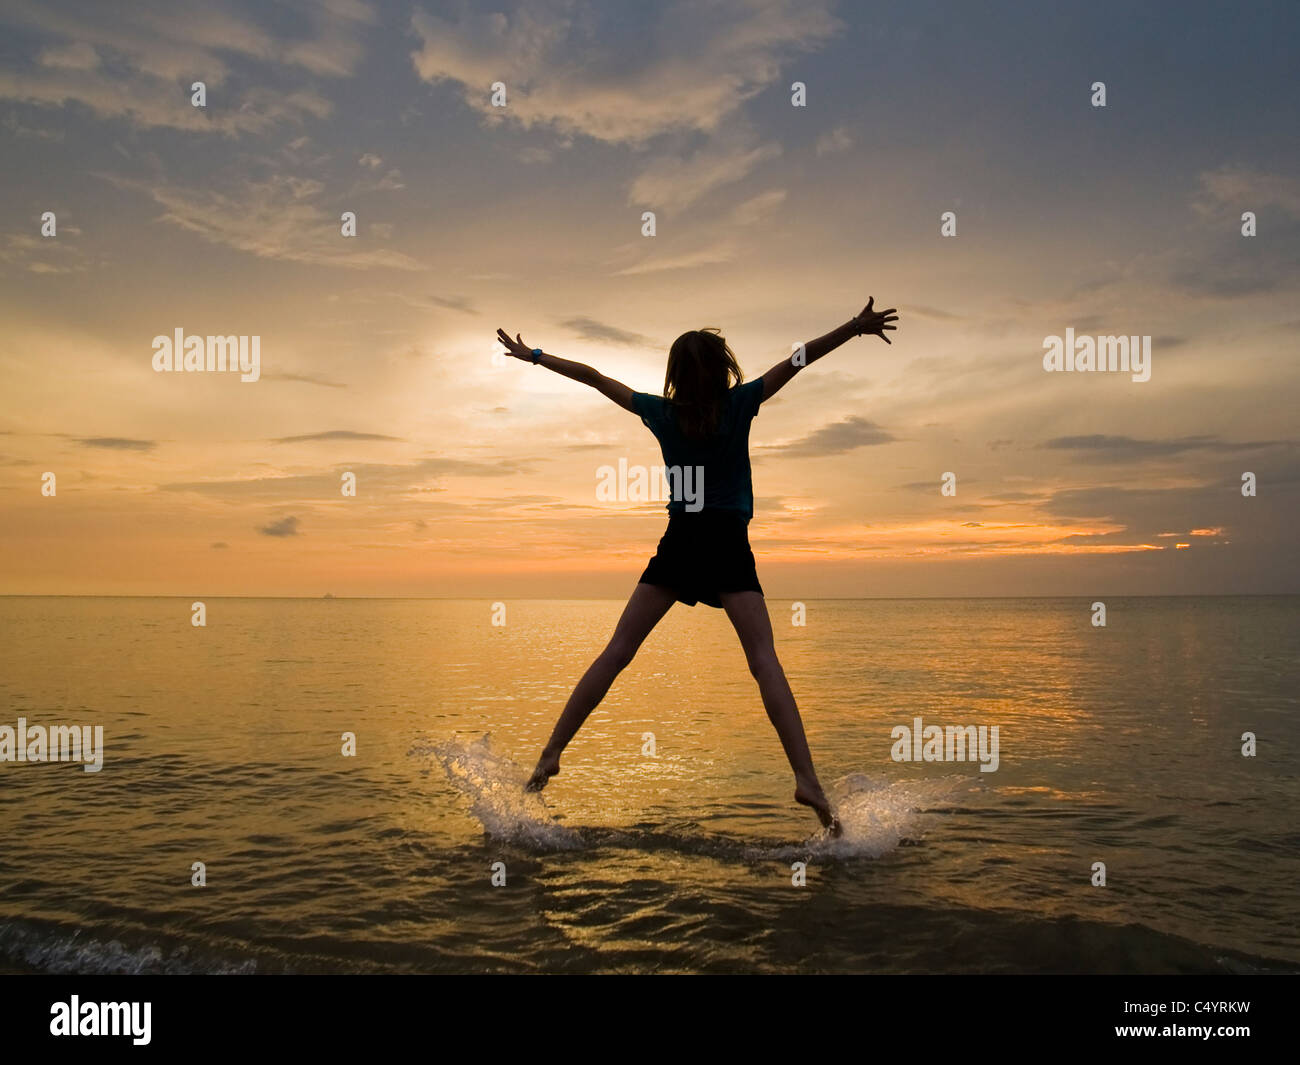 A young woman doing a star jump, jumping for joy and enjoying her freedom on the beach at sunset. Stock Photo